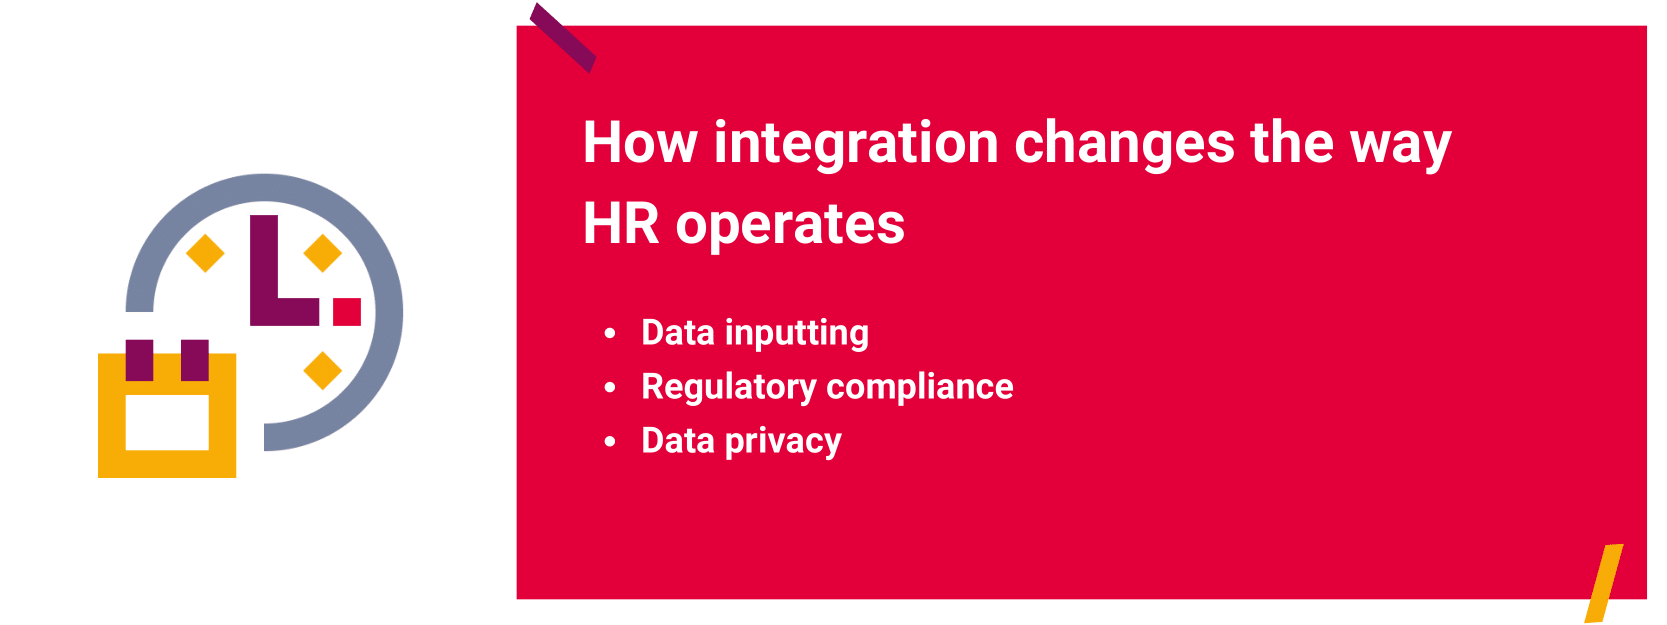 how integration changes the way HR operates